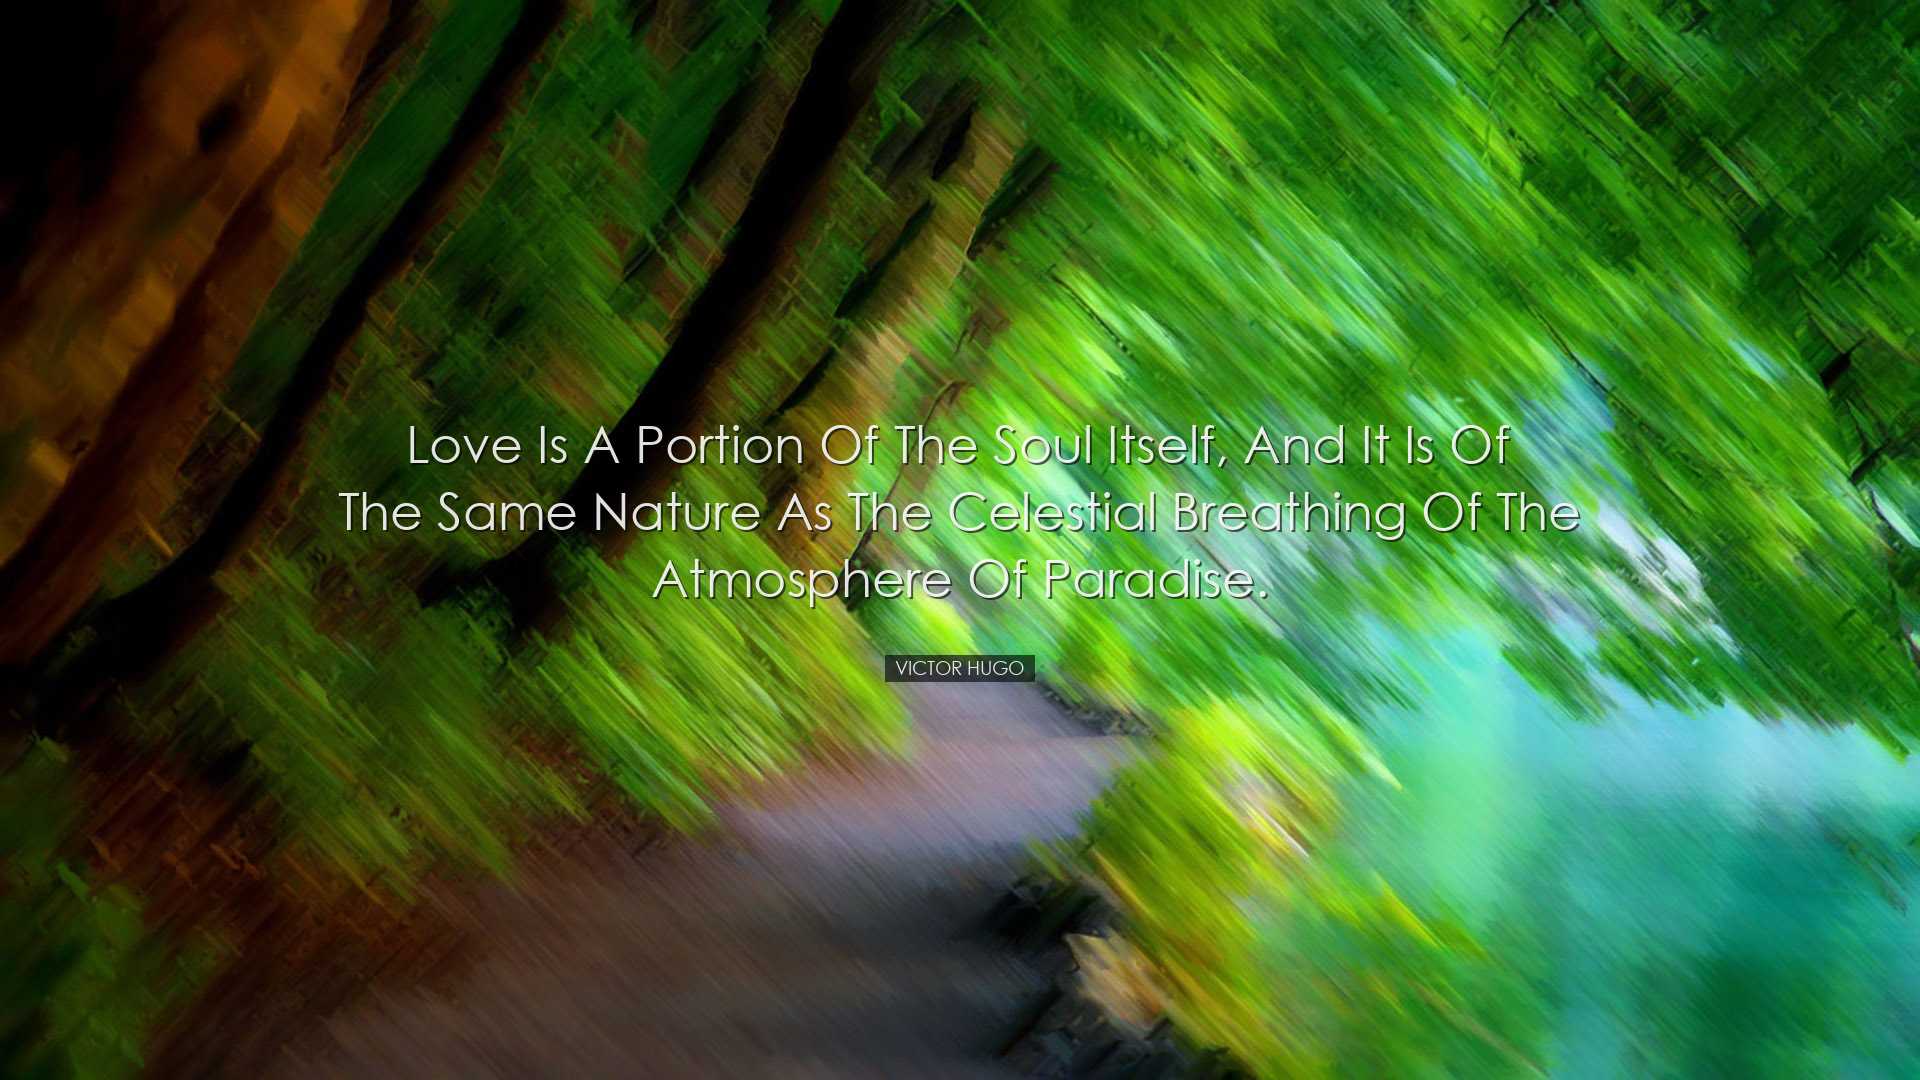 Love is a portion of the soul itself, and it is of the same nature